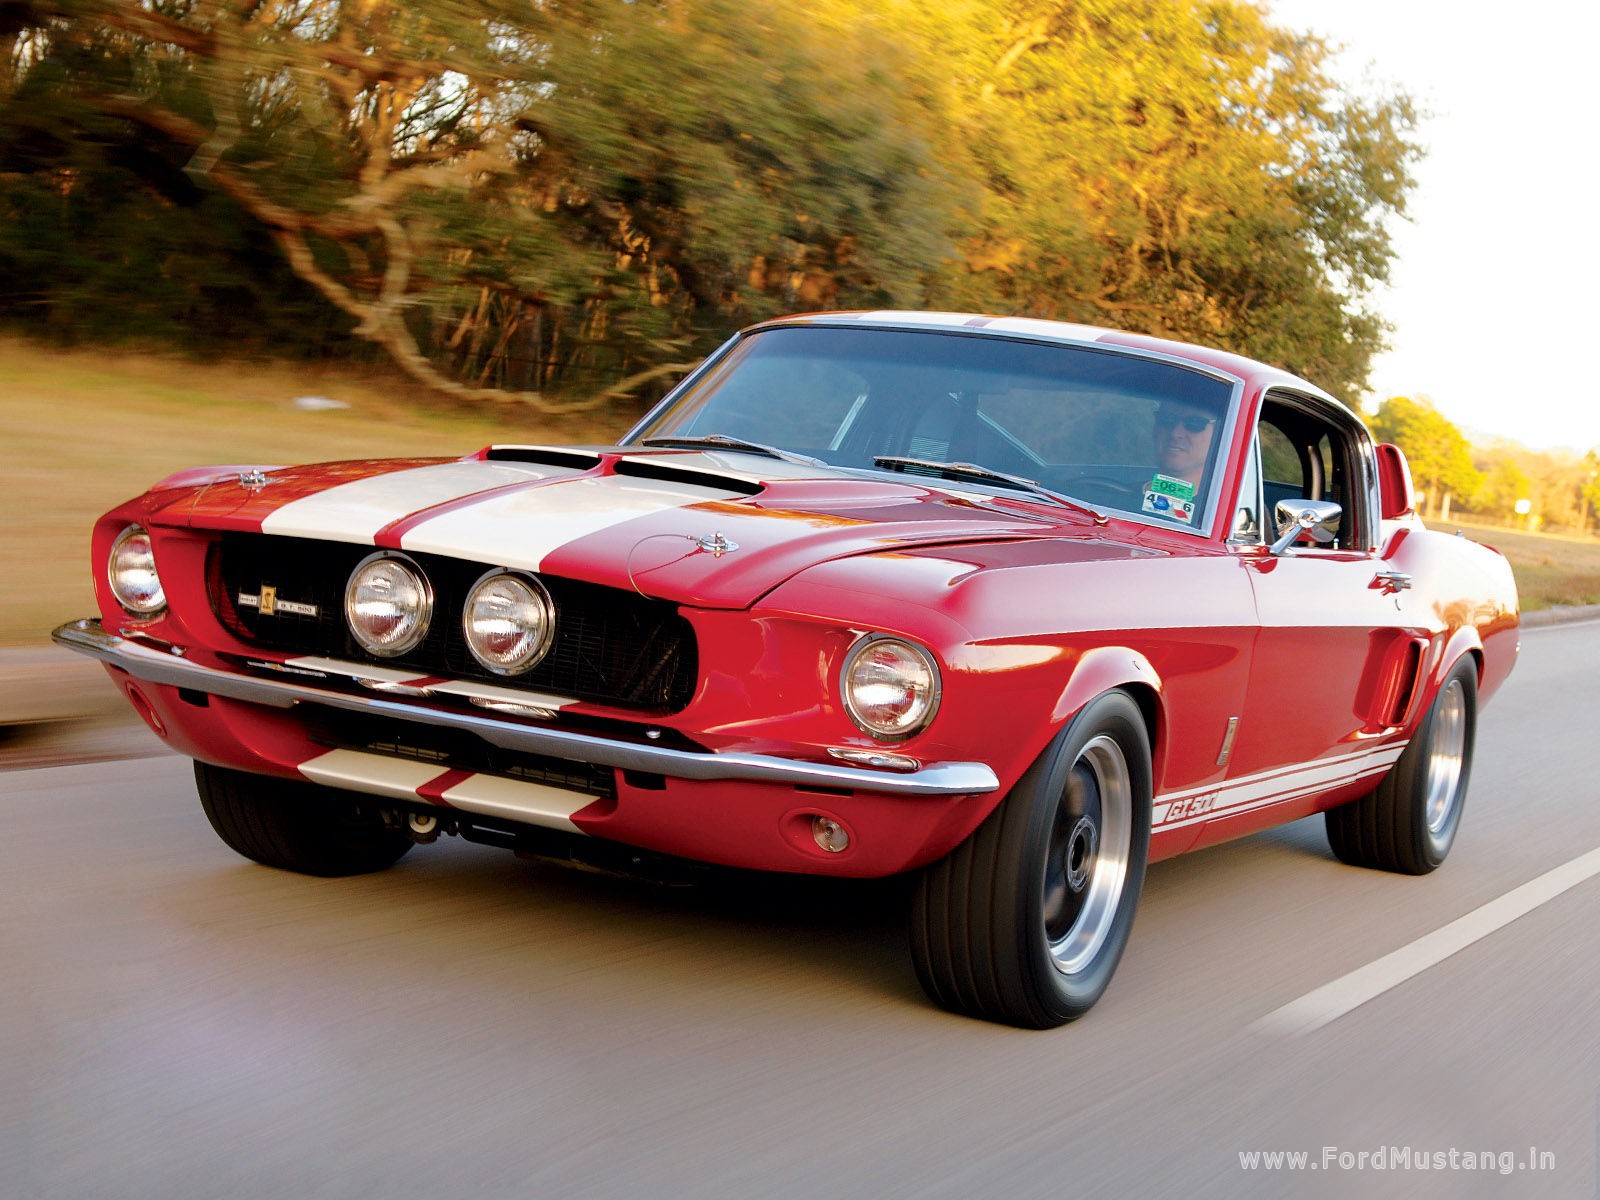 http://www.fordmustang.in/wp-content/uploads/2009/03/shelby-mustang-gt500-1967-02.jpg